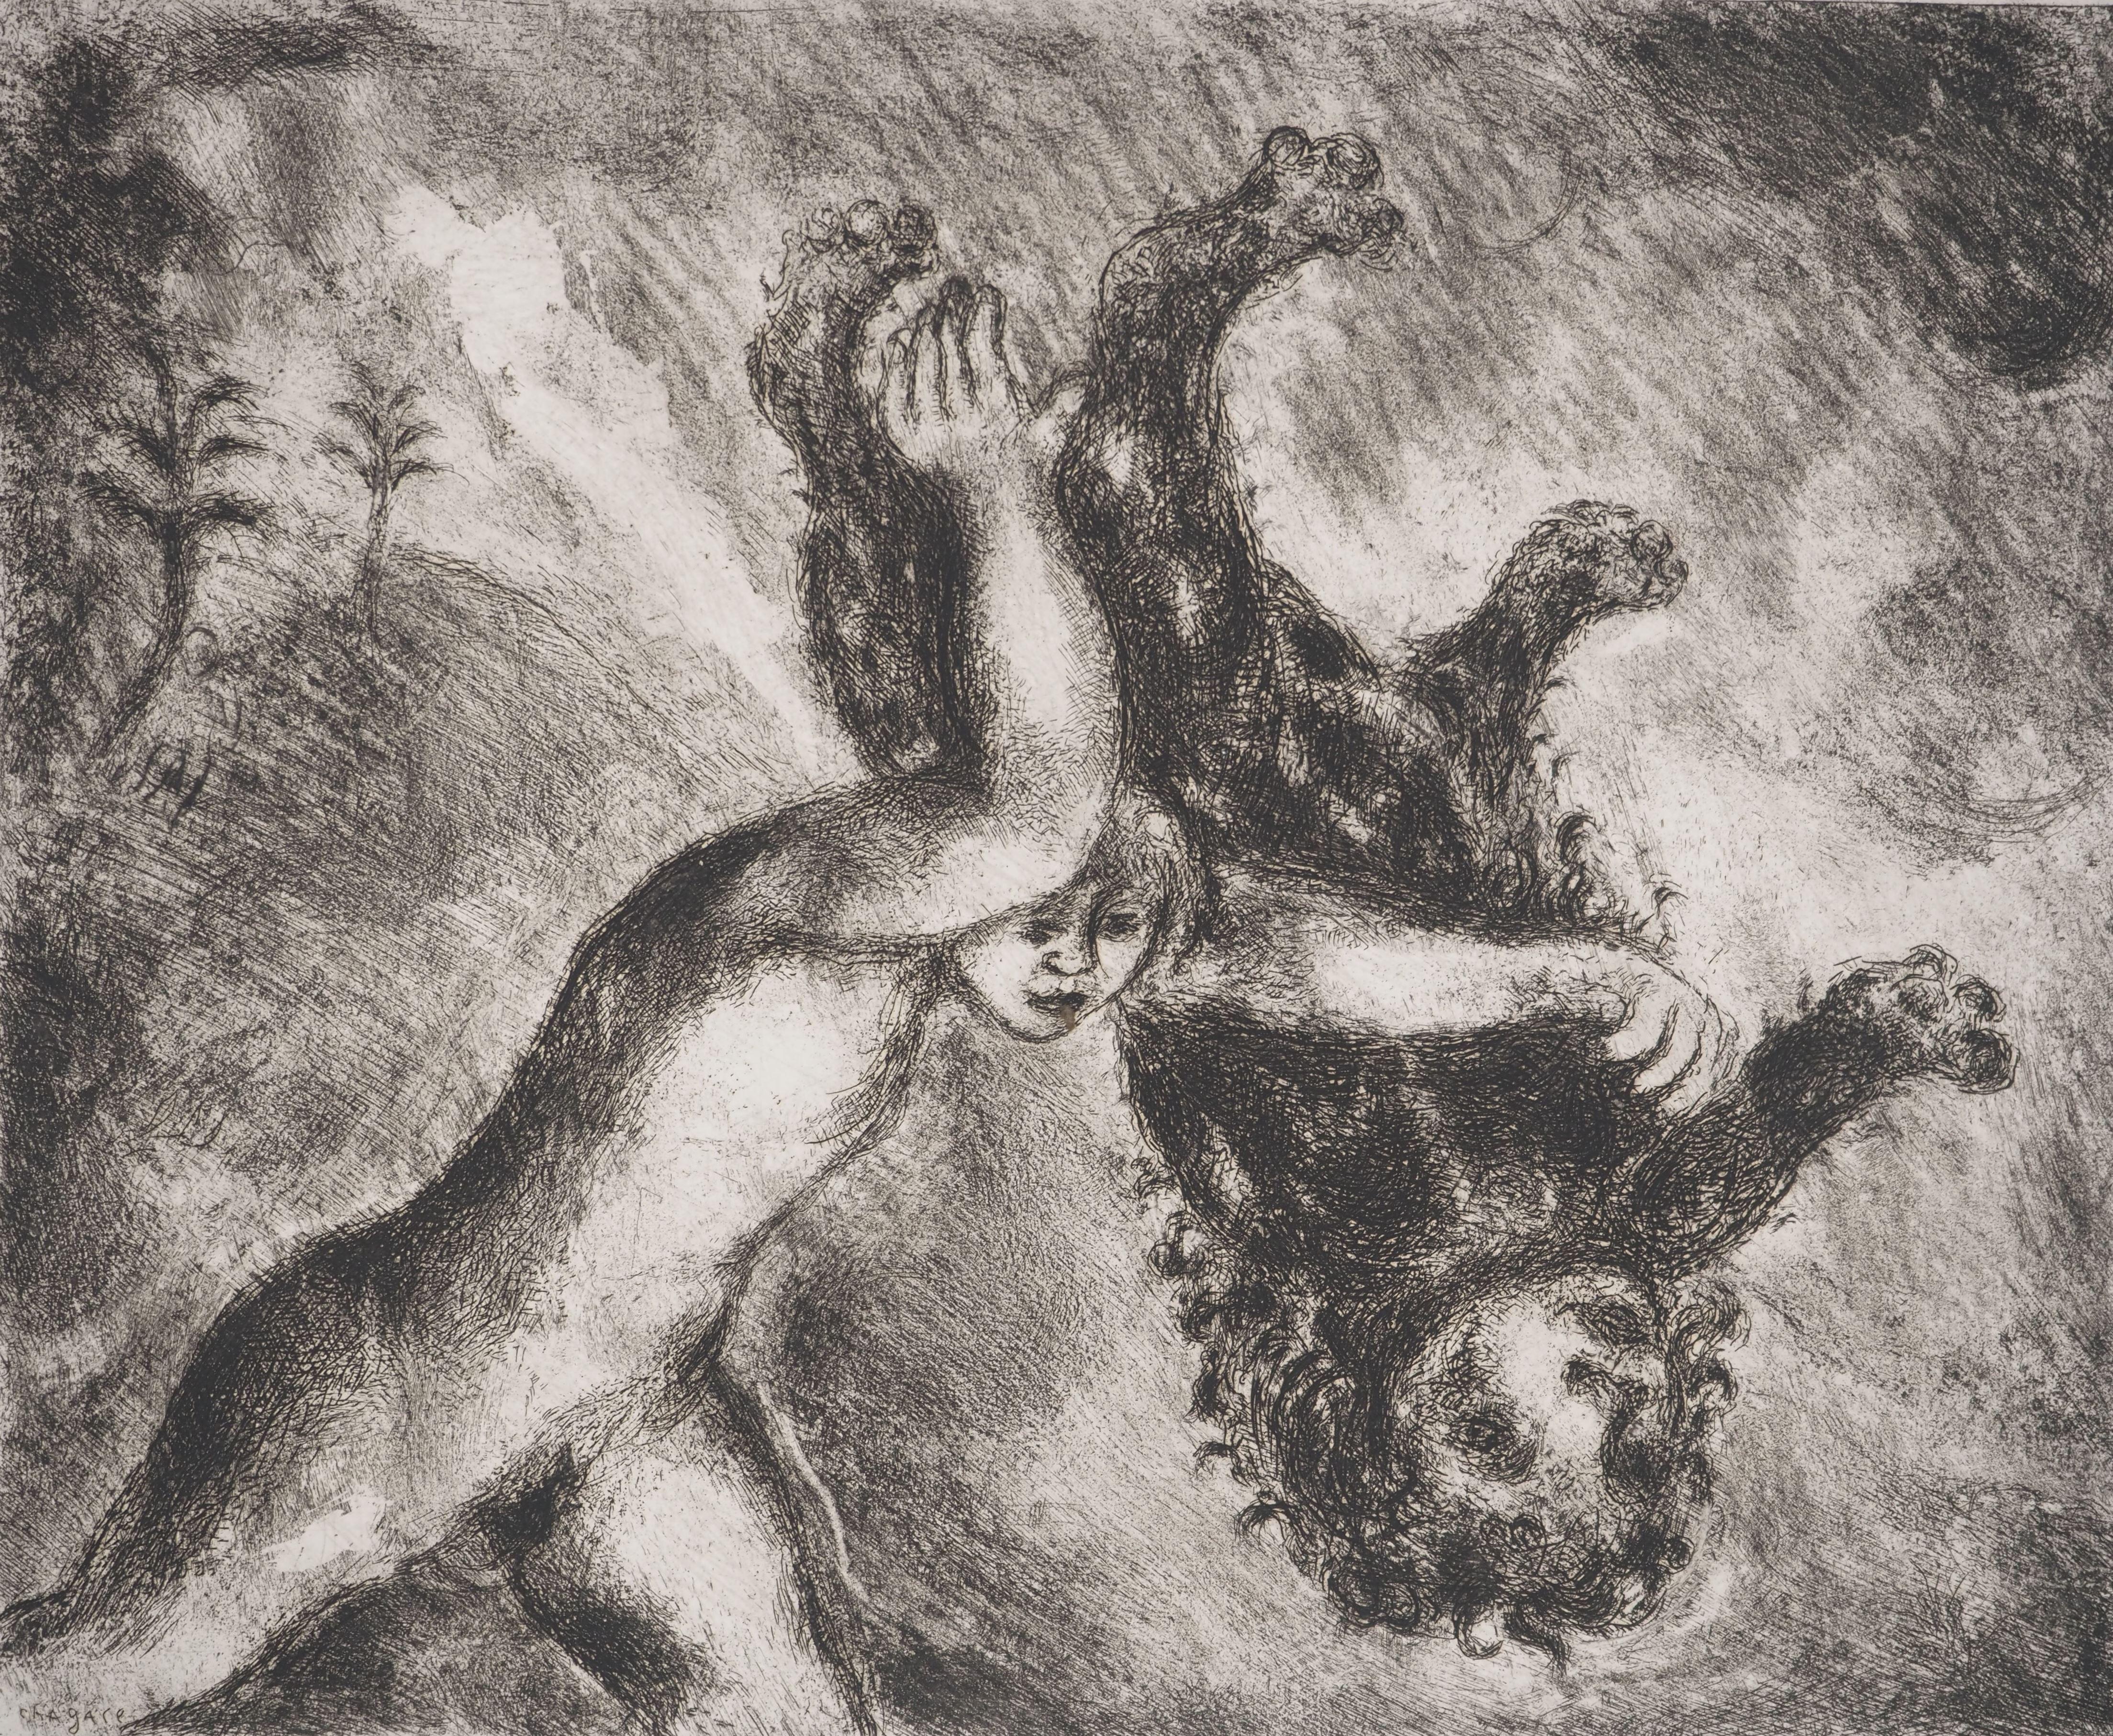 Marc Chagall (1887-1958)
Bible : Samson and the lion, (Samson et le lion), 1939

Original etching
Printed signature in the plate
On Montval vellum, 33.5 x 44 cm (c. 13.1 x 17.3 inch)

INFORMATION: Published by Vollard / Tériade in 1956

REFERENCE: